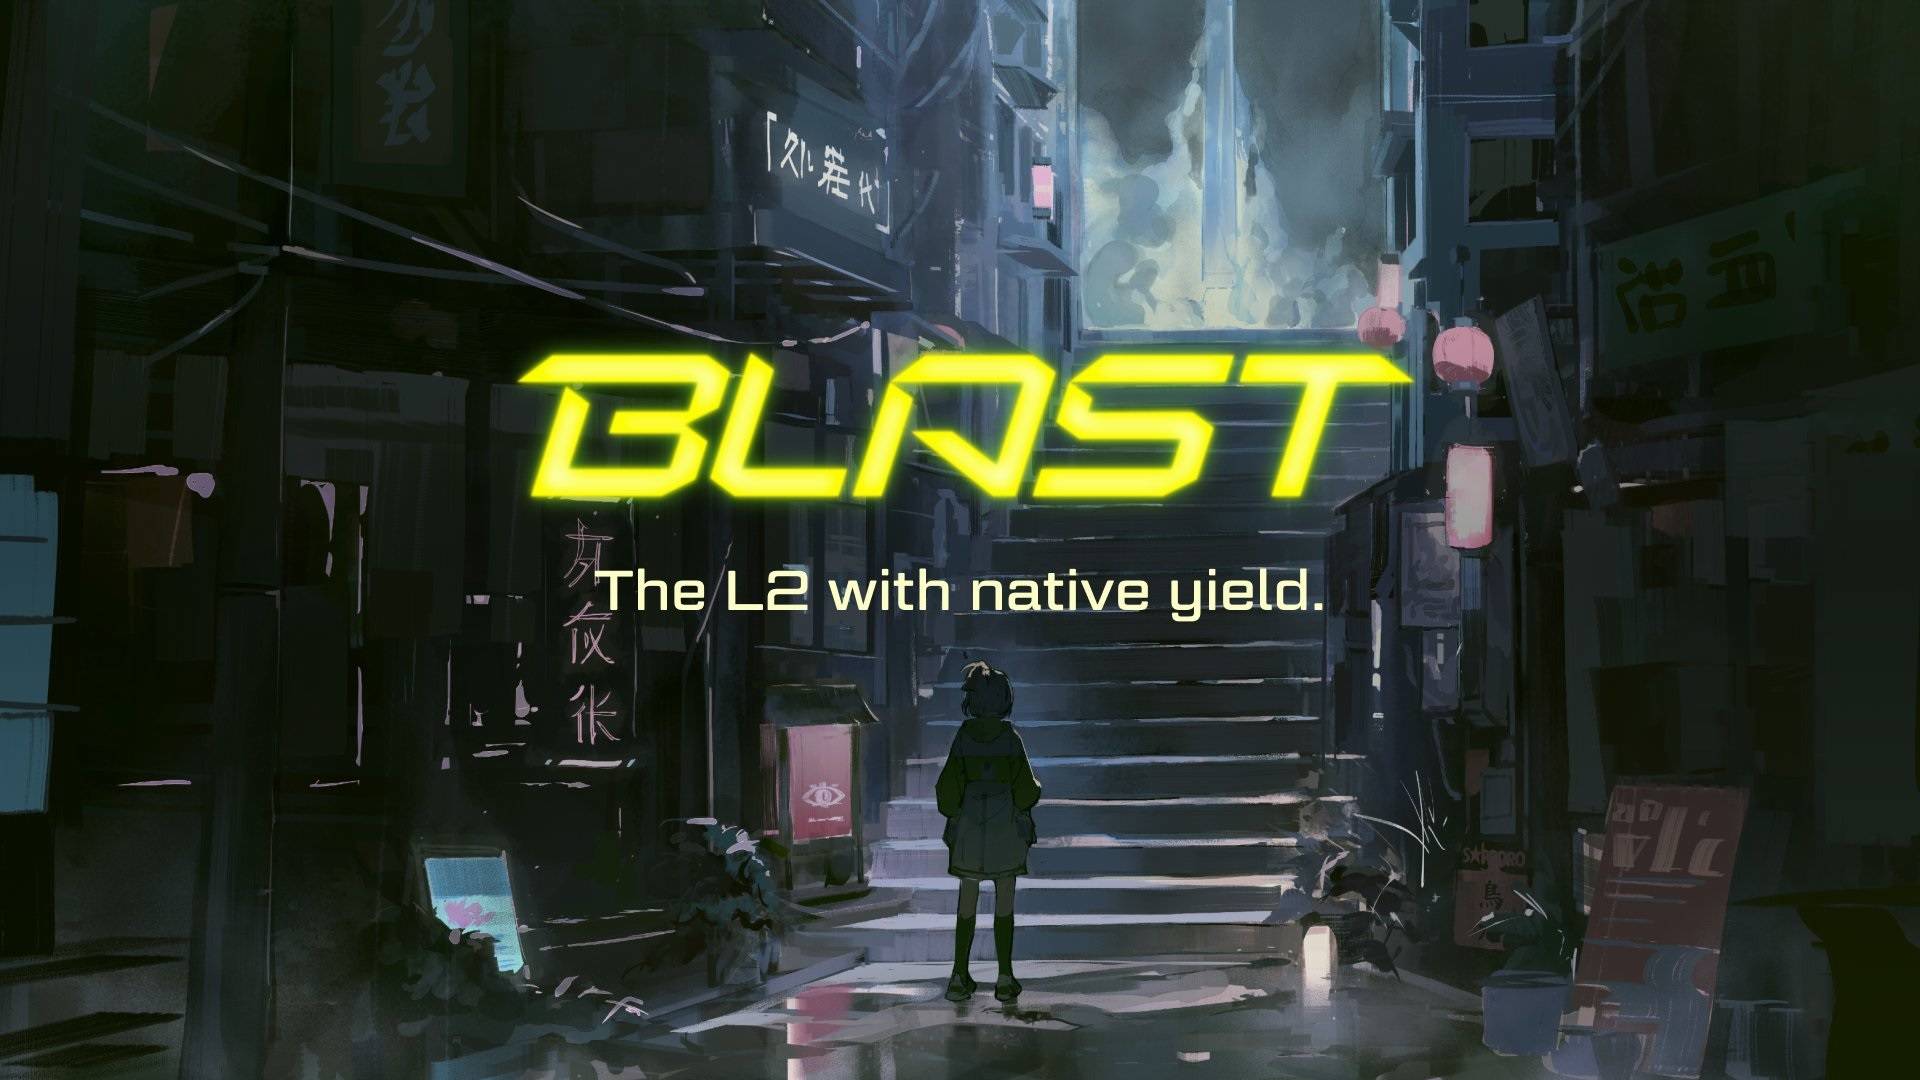 Blast is an Ethereum Layer-2 (L2) platform created by the same talented team behind Blur, the popular NFT marketplace protocol that shared the top marketplace ranking by volume in 2023 with OpenSea.